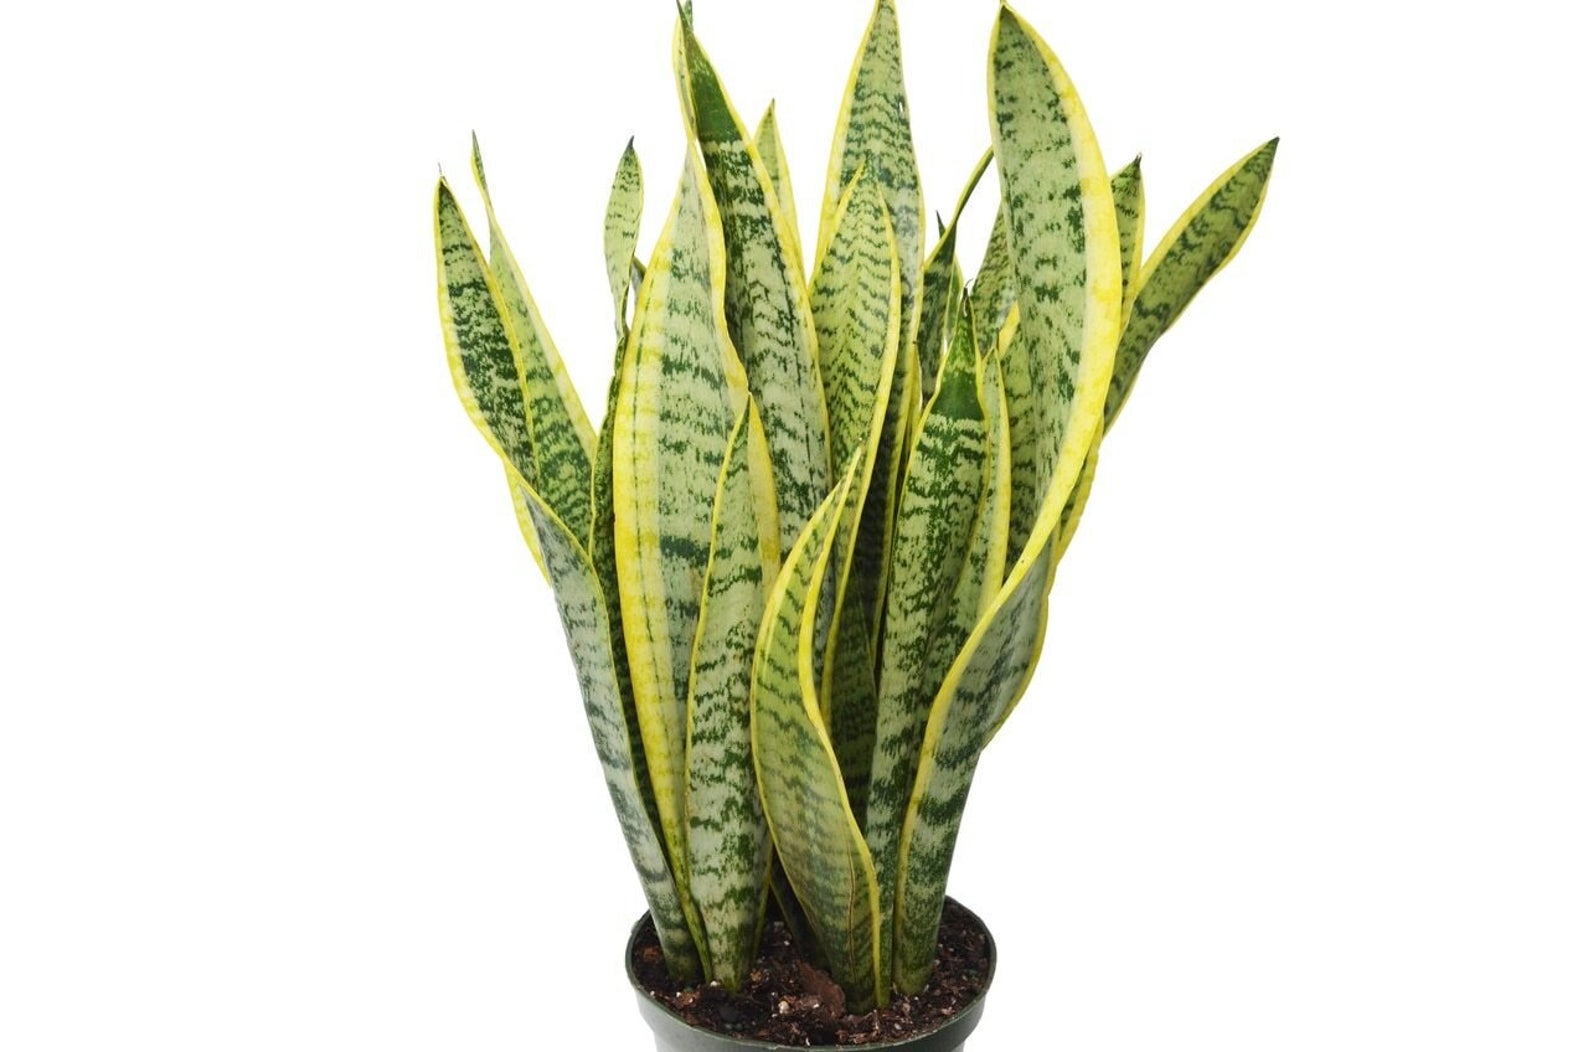 Indoor Plants, LLC is one of our favorite sources for Etsy houseplants.